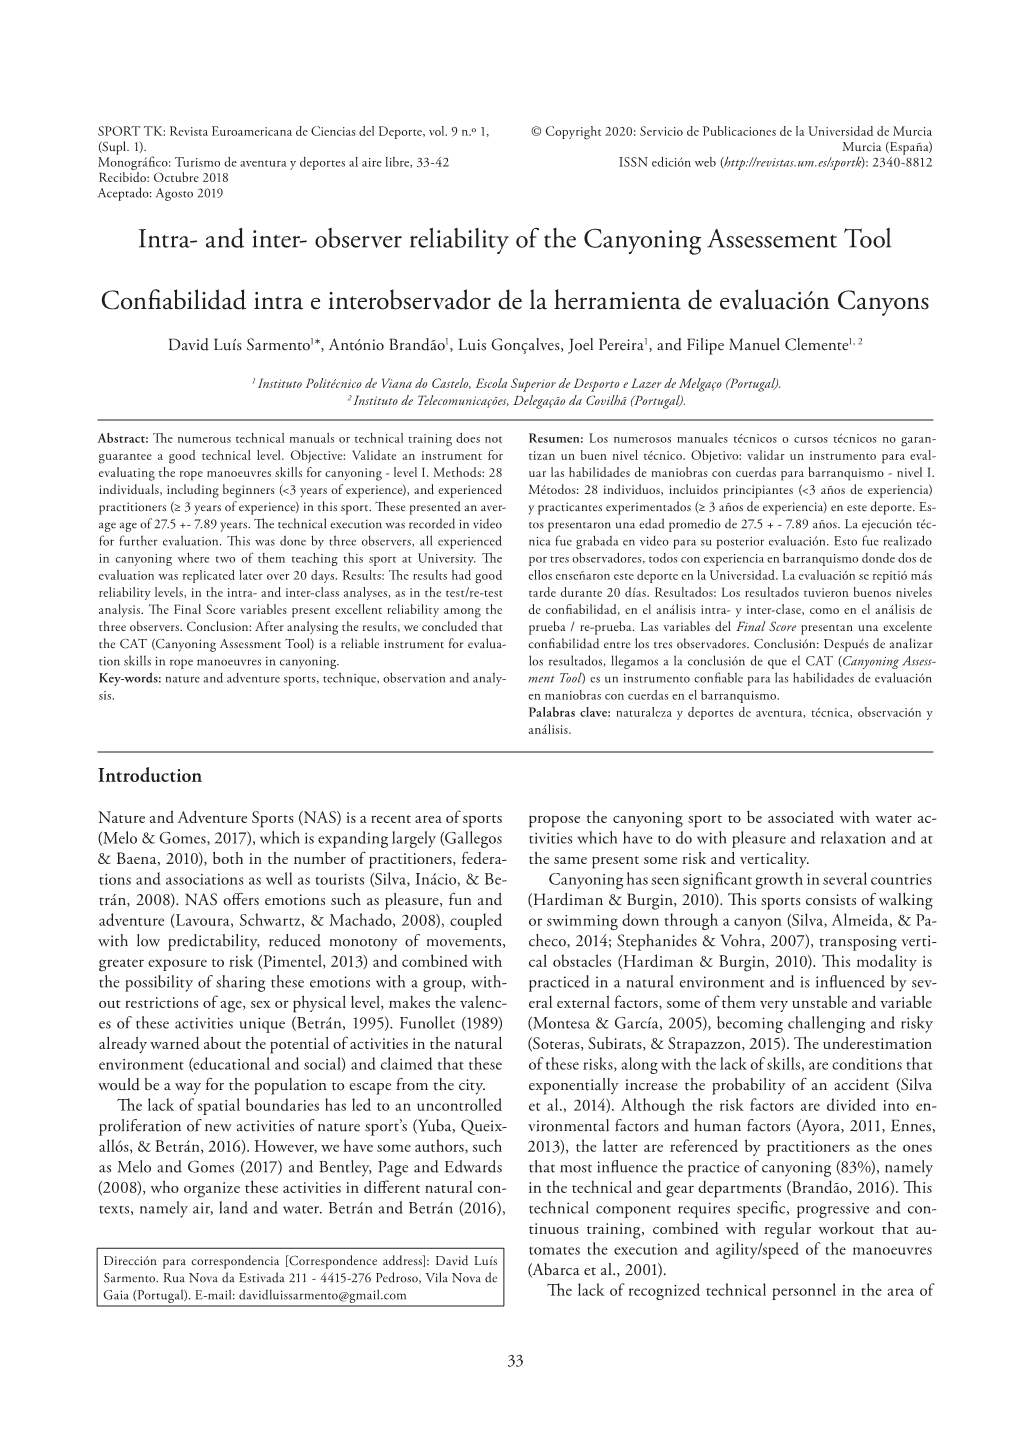 Intra- and Inter- Observer Reliability of the Canyoning Assessement Tool